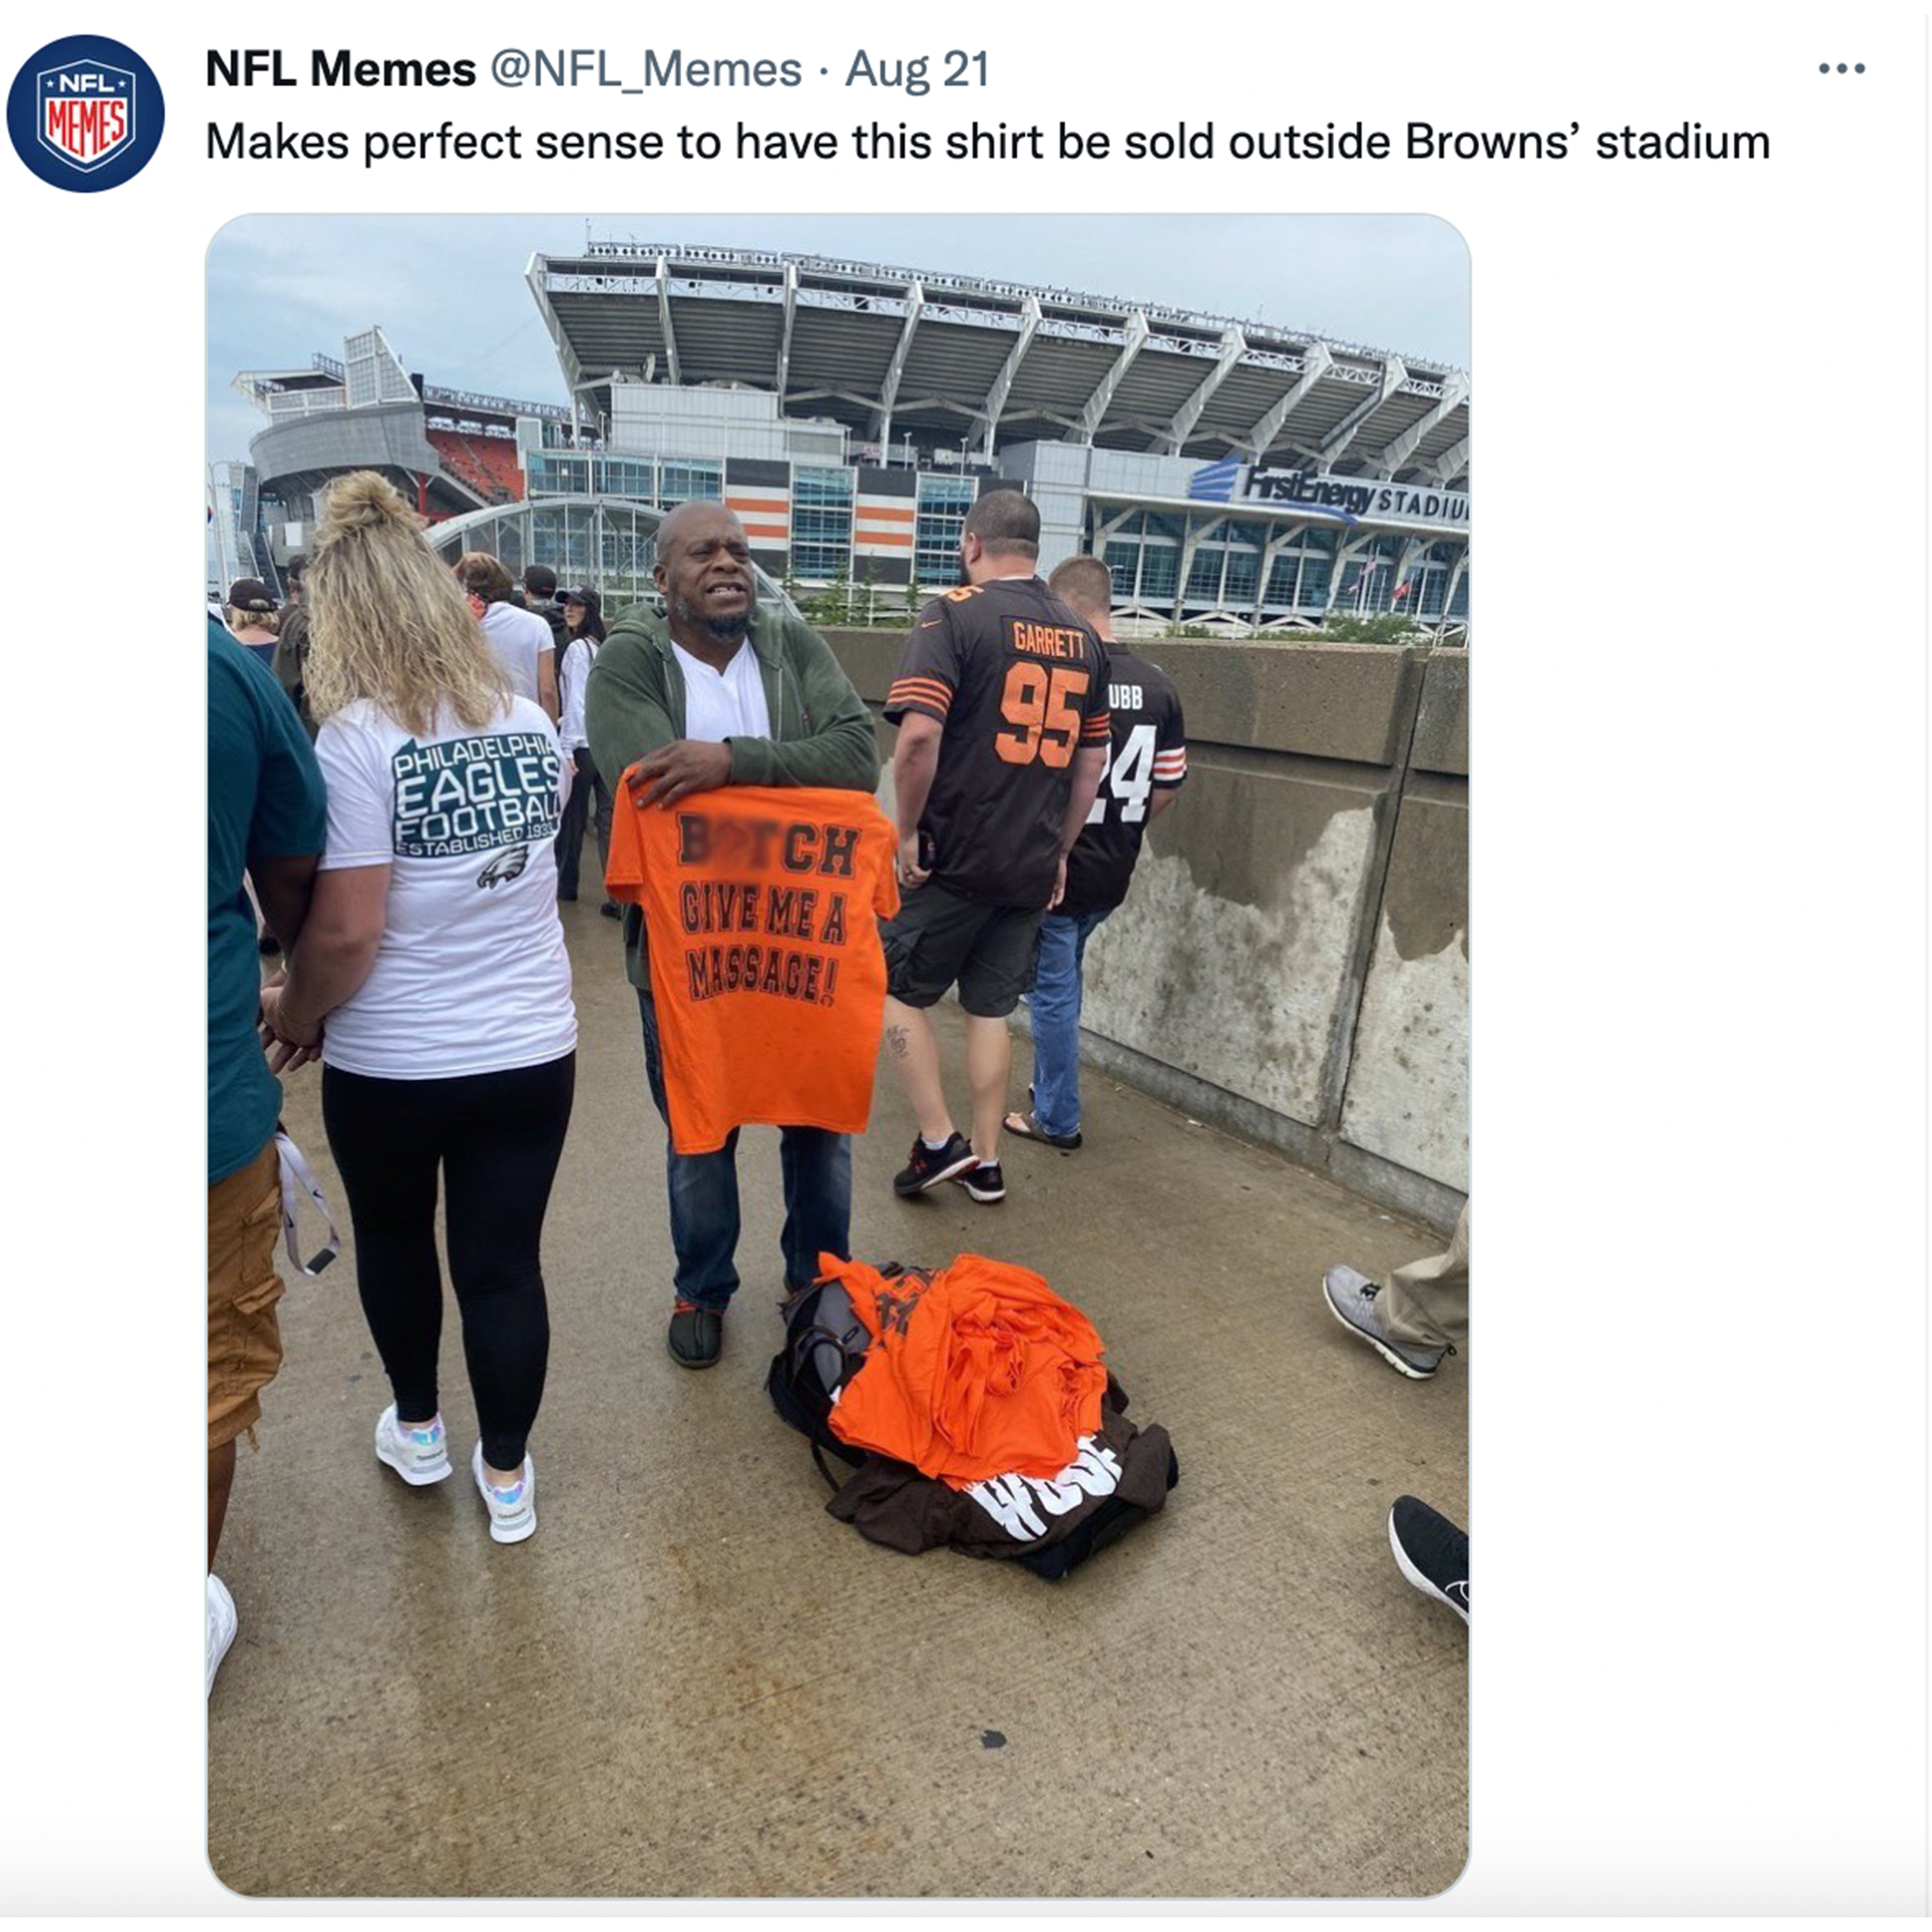 NFL Memes Preseason Roundup - FirstEnergy Stadium - Onelo Nemes Nfl Memes Aug 21 Makes perfect sense to have this shirt be sold outside Browns' stadium Pharp Eagles Footba Bitch Give Me A Hassage! Turnett 95 Want Stadill